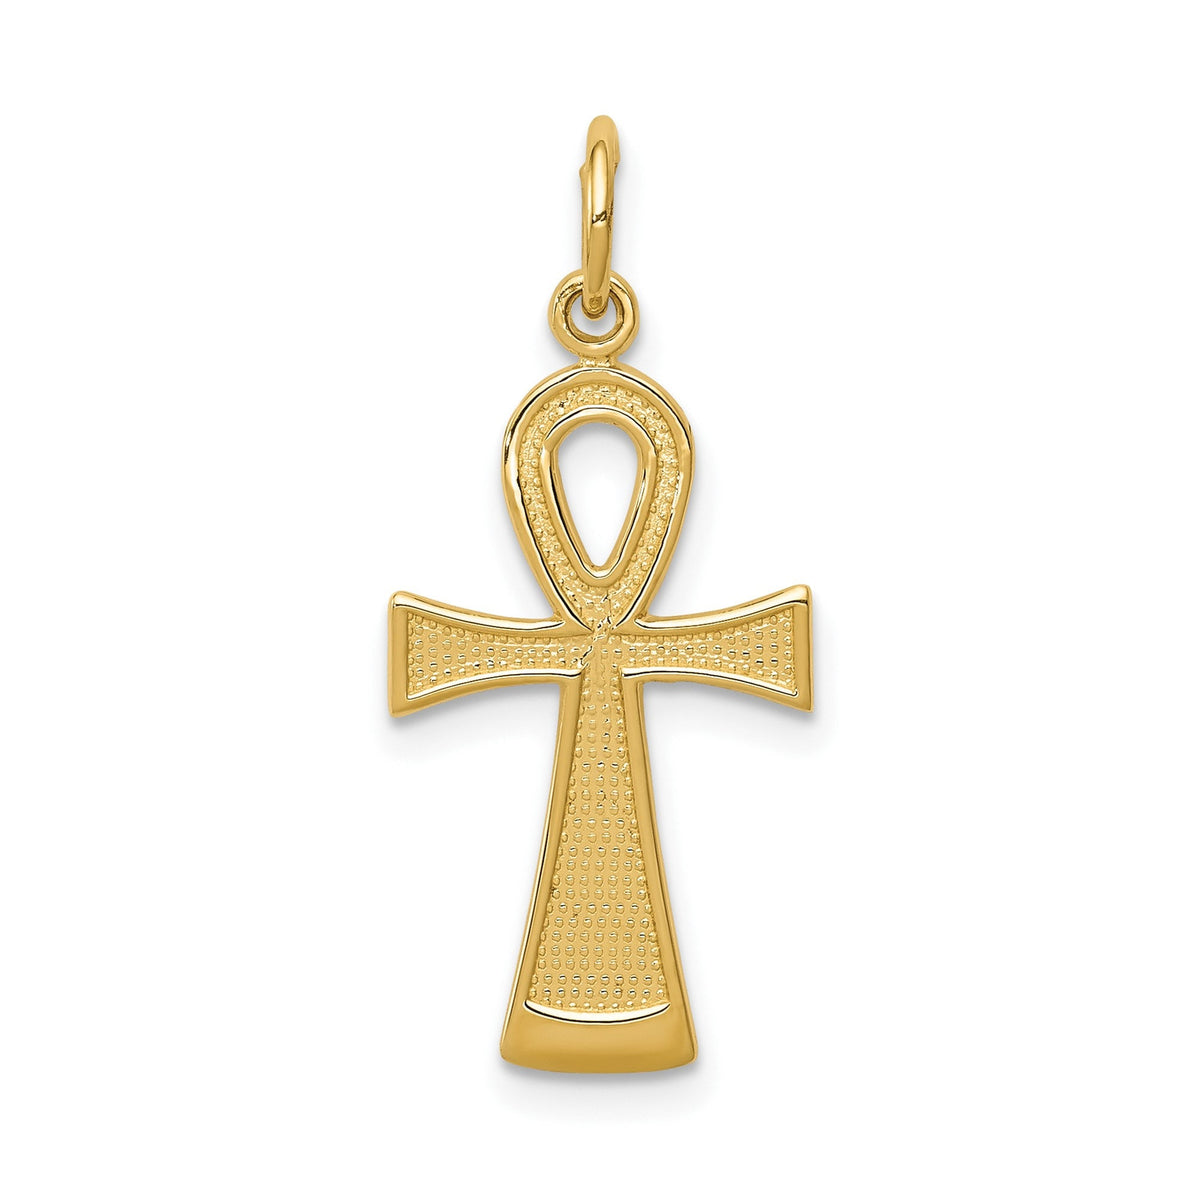 Solid 14k Yellow Egyptian Ankh Cross Pendant w/ Box Chain or Cable Chain - Gift Box Included - Made in USA